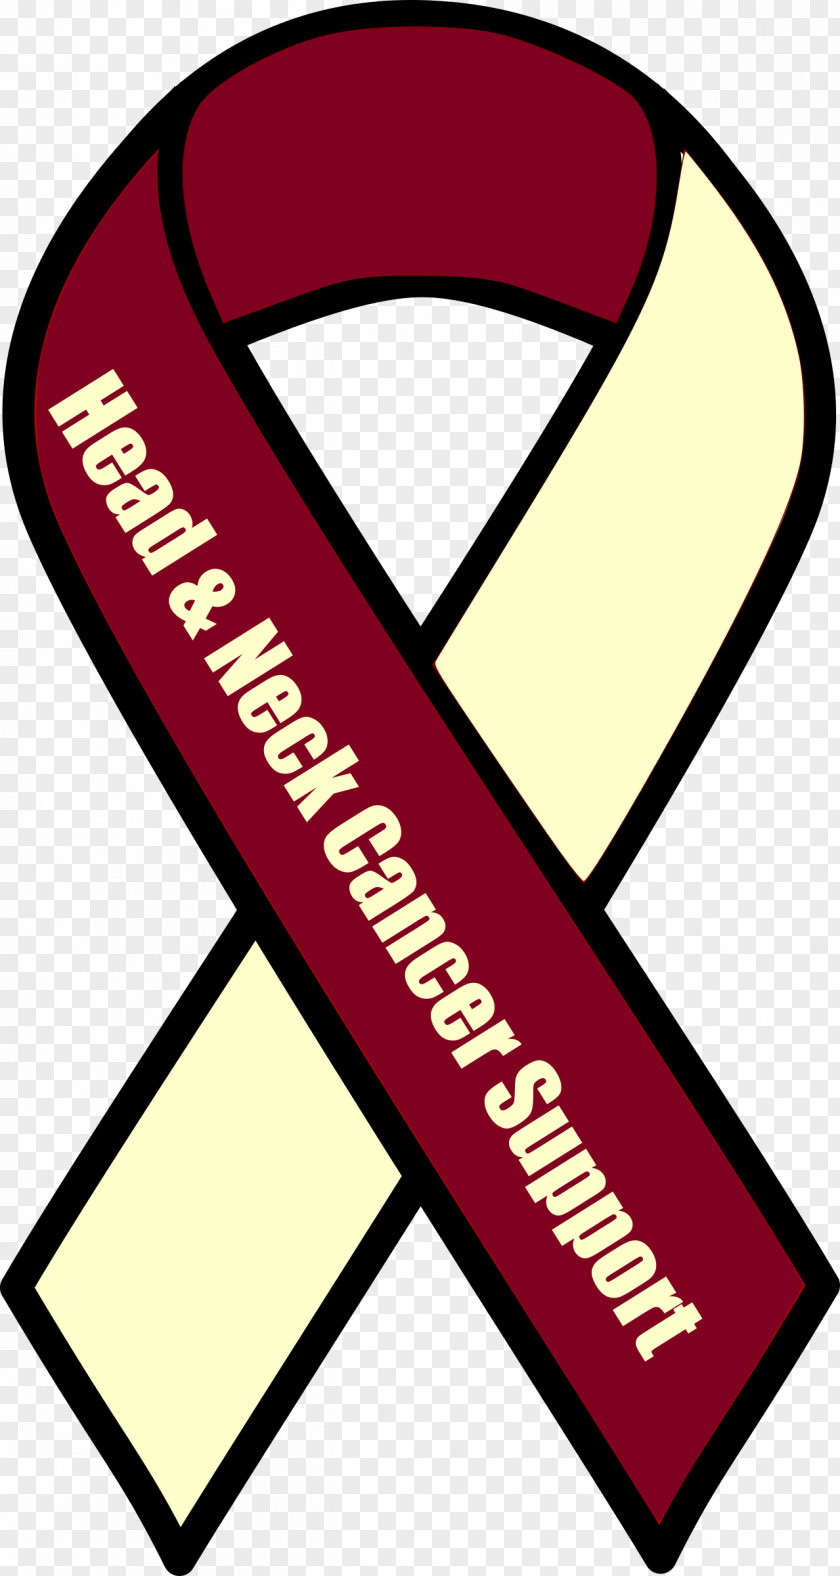 Support Awareness Ribbon Head And Neck Cancer Pink Clip Art PNG